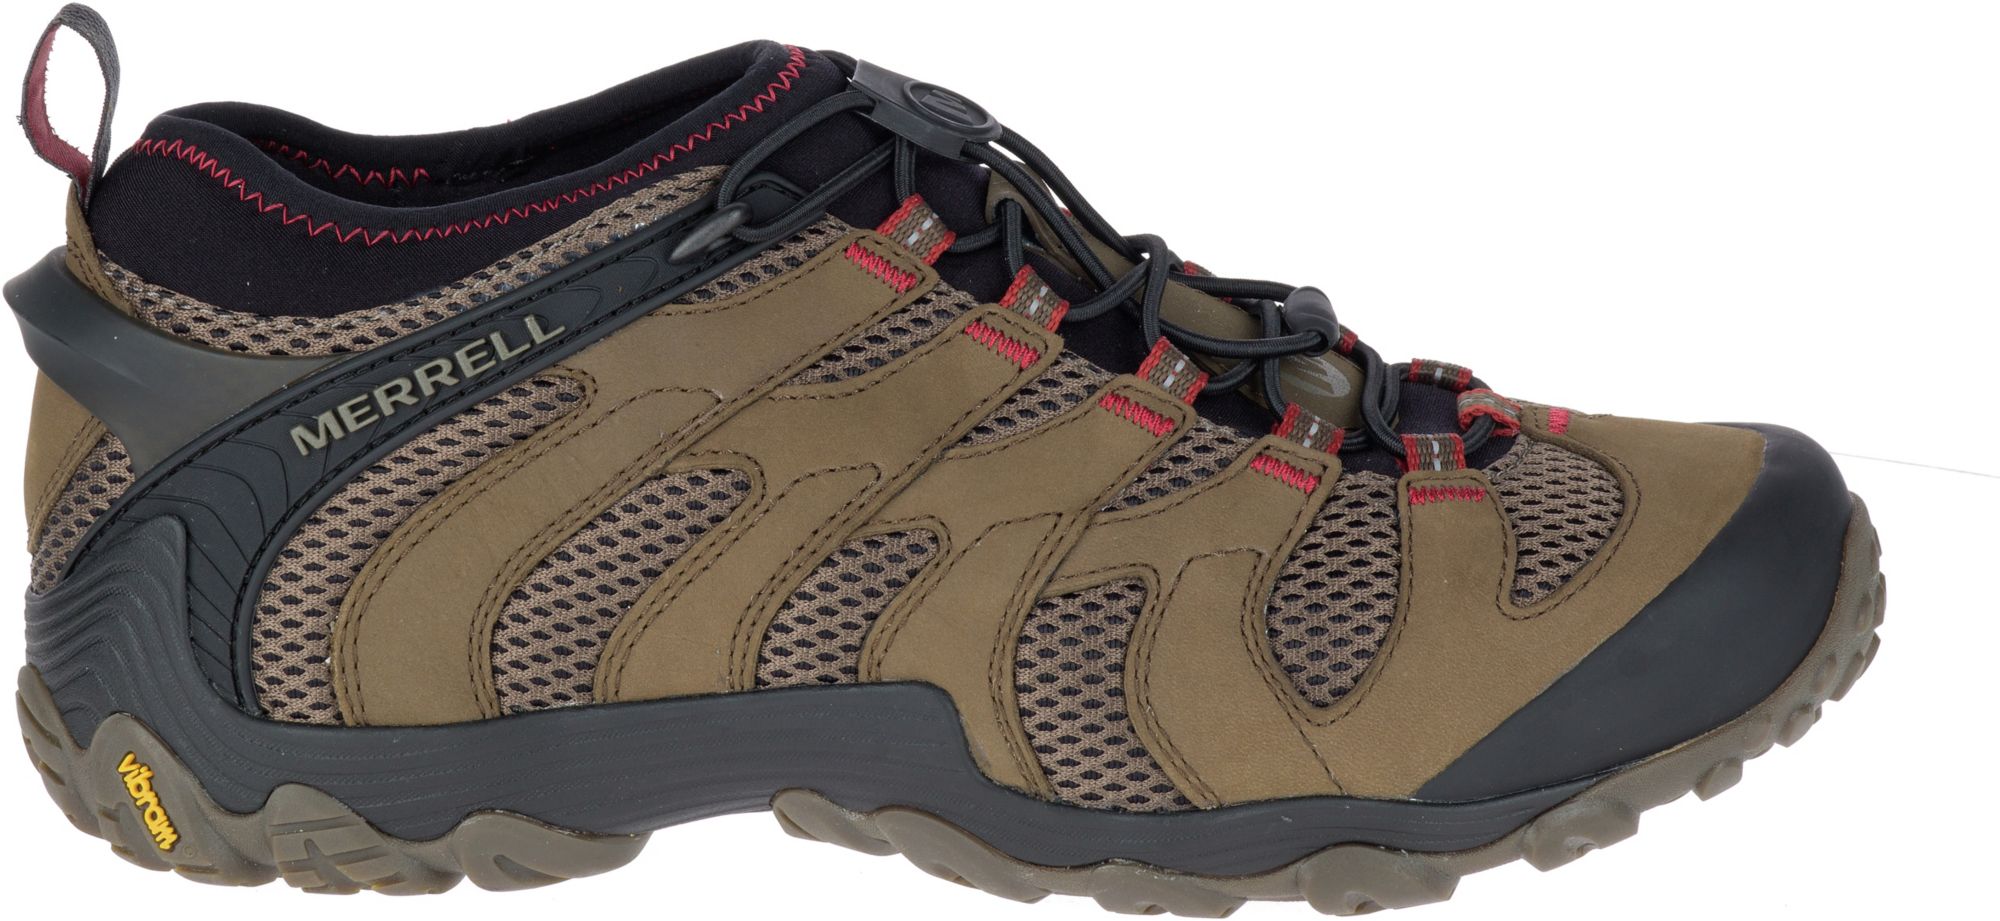 Chameleon 7 Stretch Hiking Shoes 